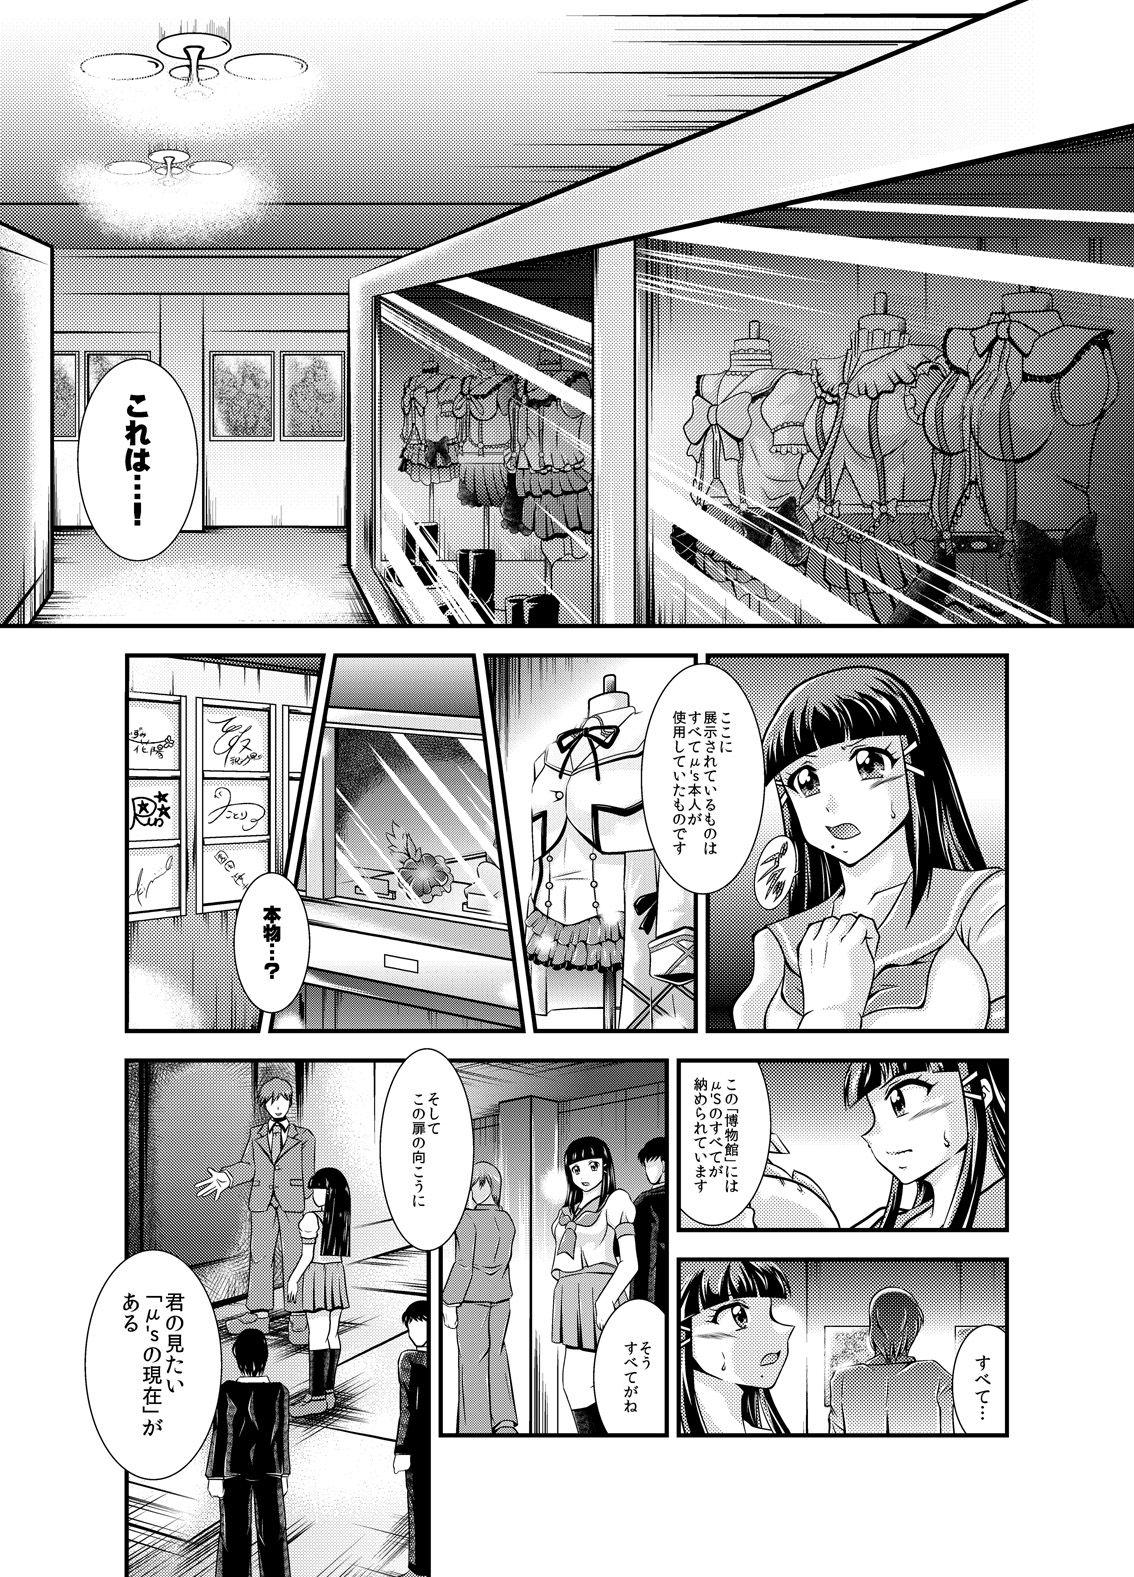 Innocent ProjectAqours EP02:"M"EMORIES - Love live Stepdaughter - Page 5